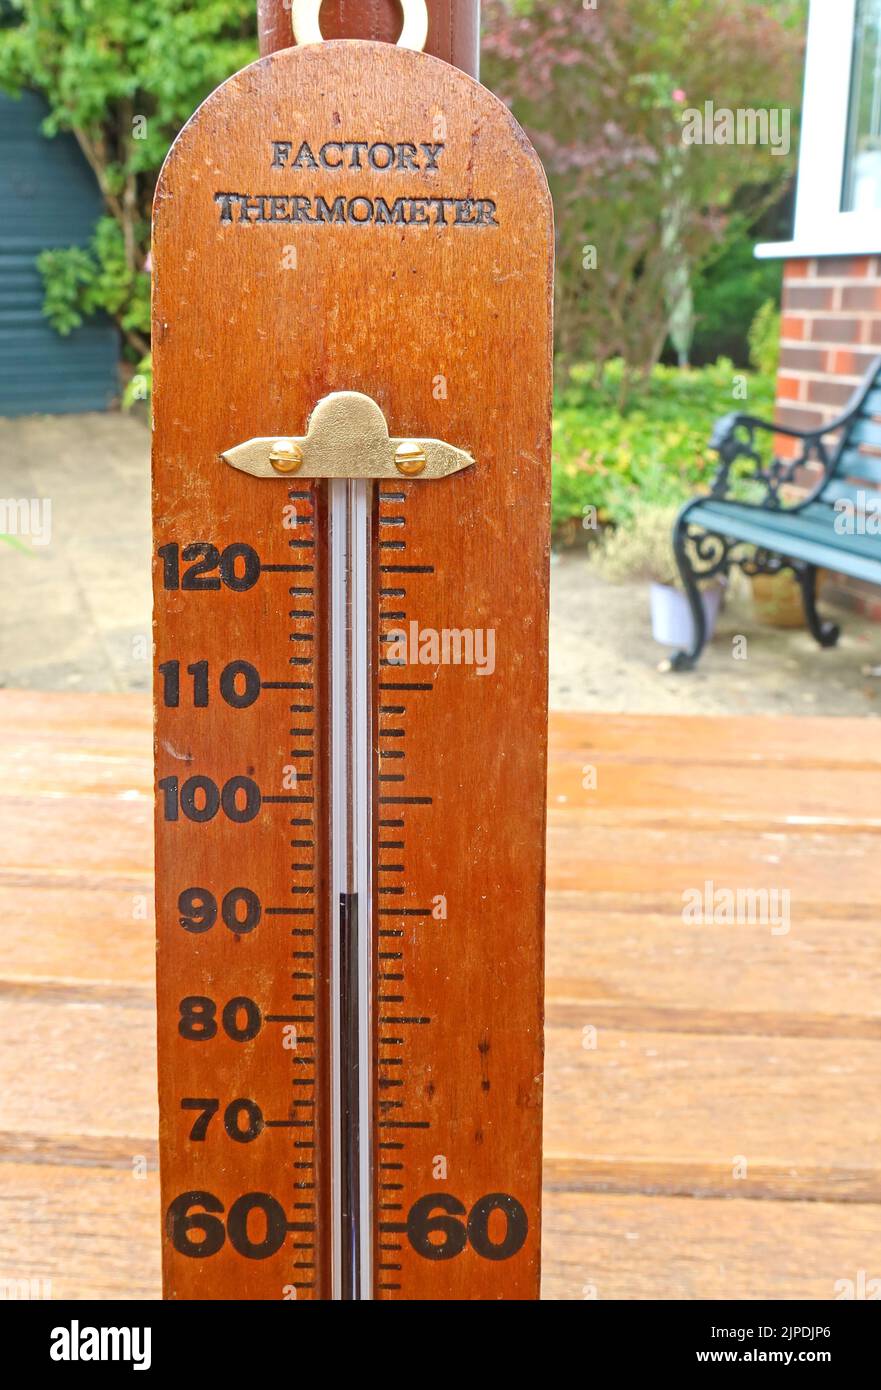 Traditional Factory Thermometer, showing a temperature of over 90 degrees Fahrenheit, caused by warming & climate change? Stock Photo